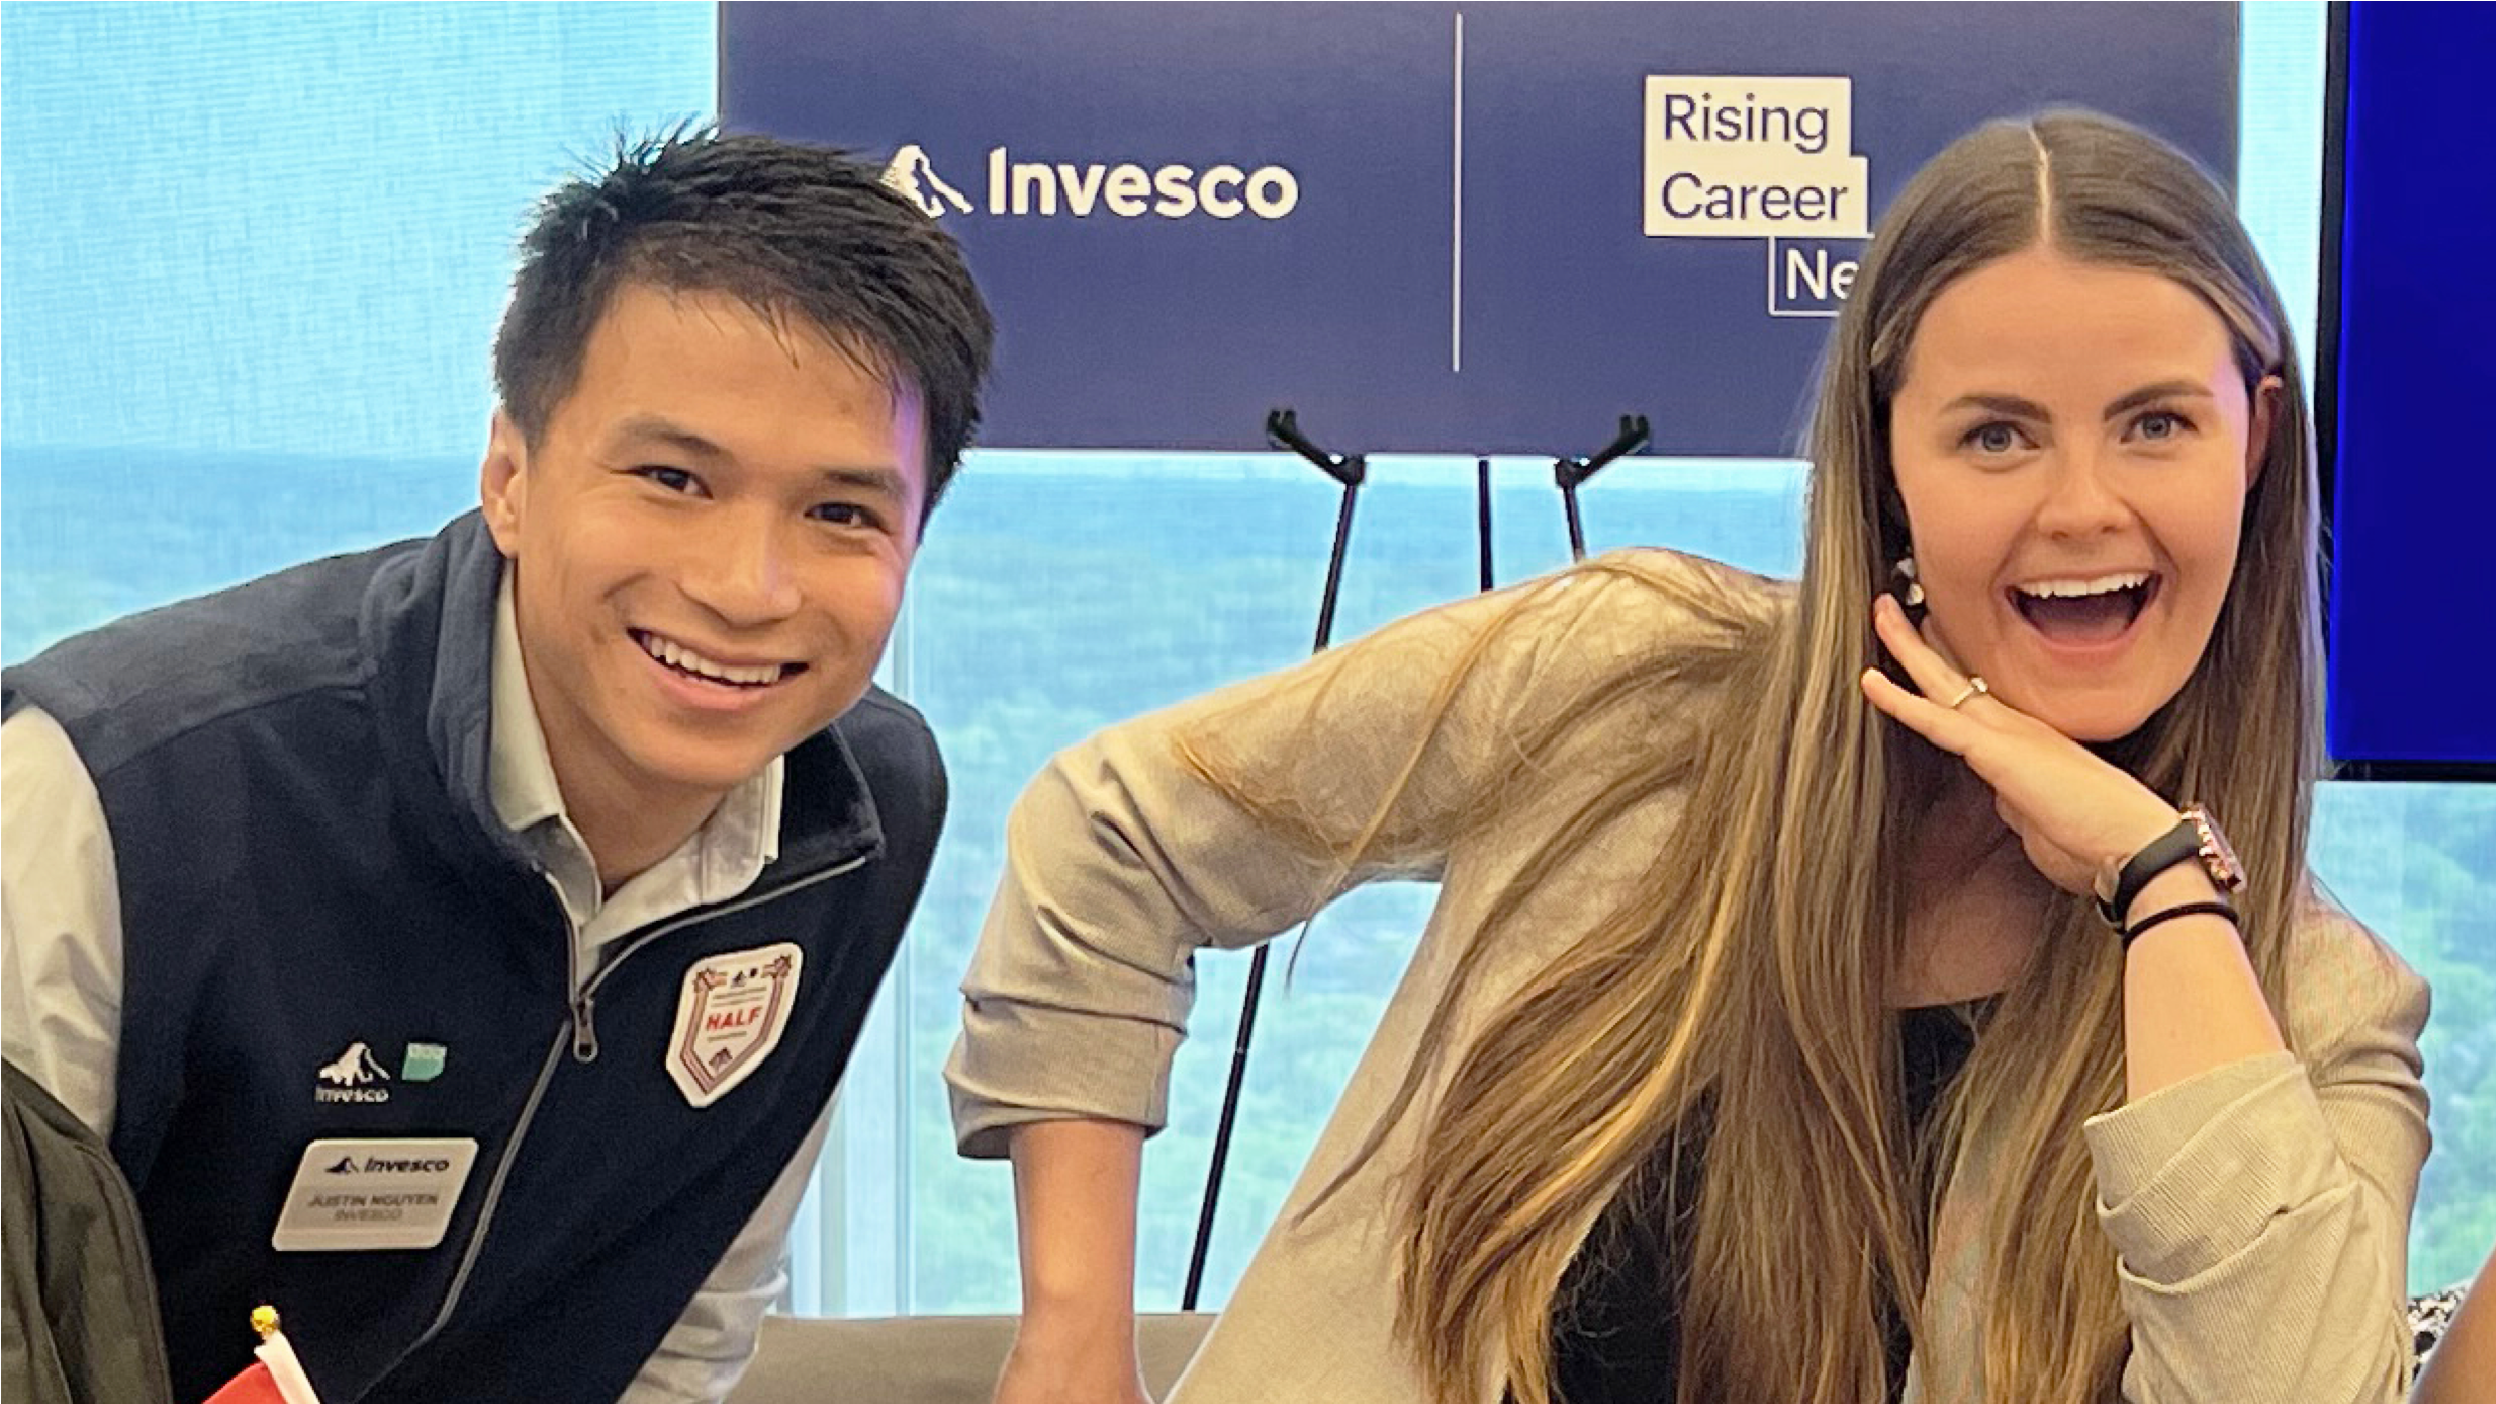 Young professionals at Invesco promoting upcoming events